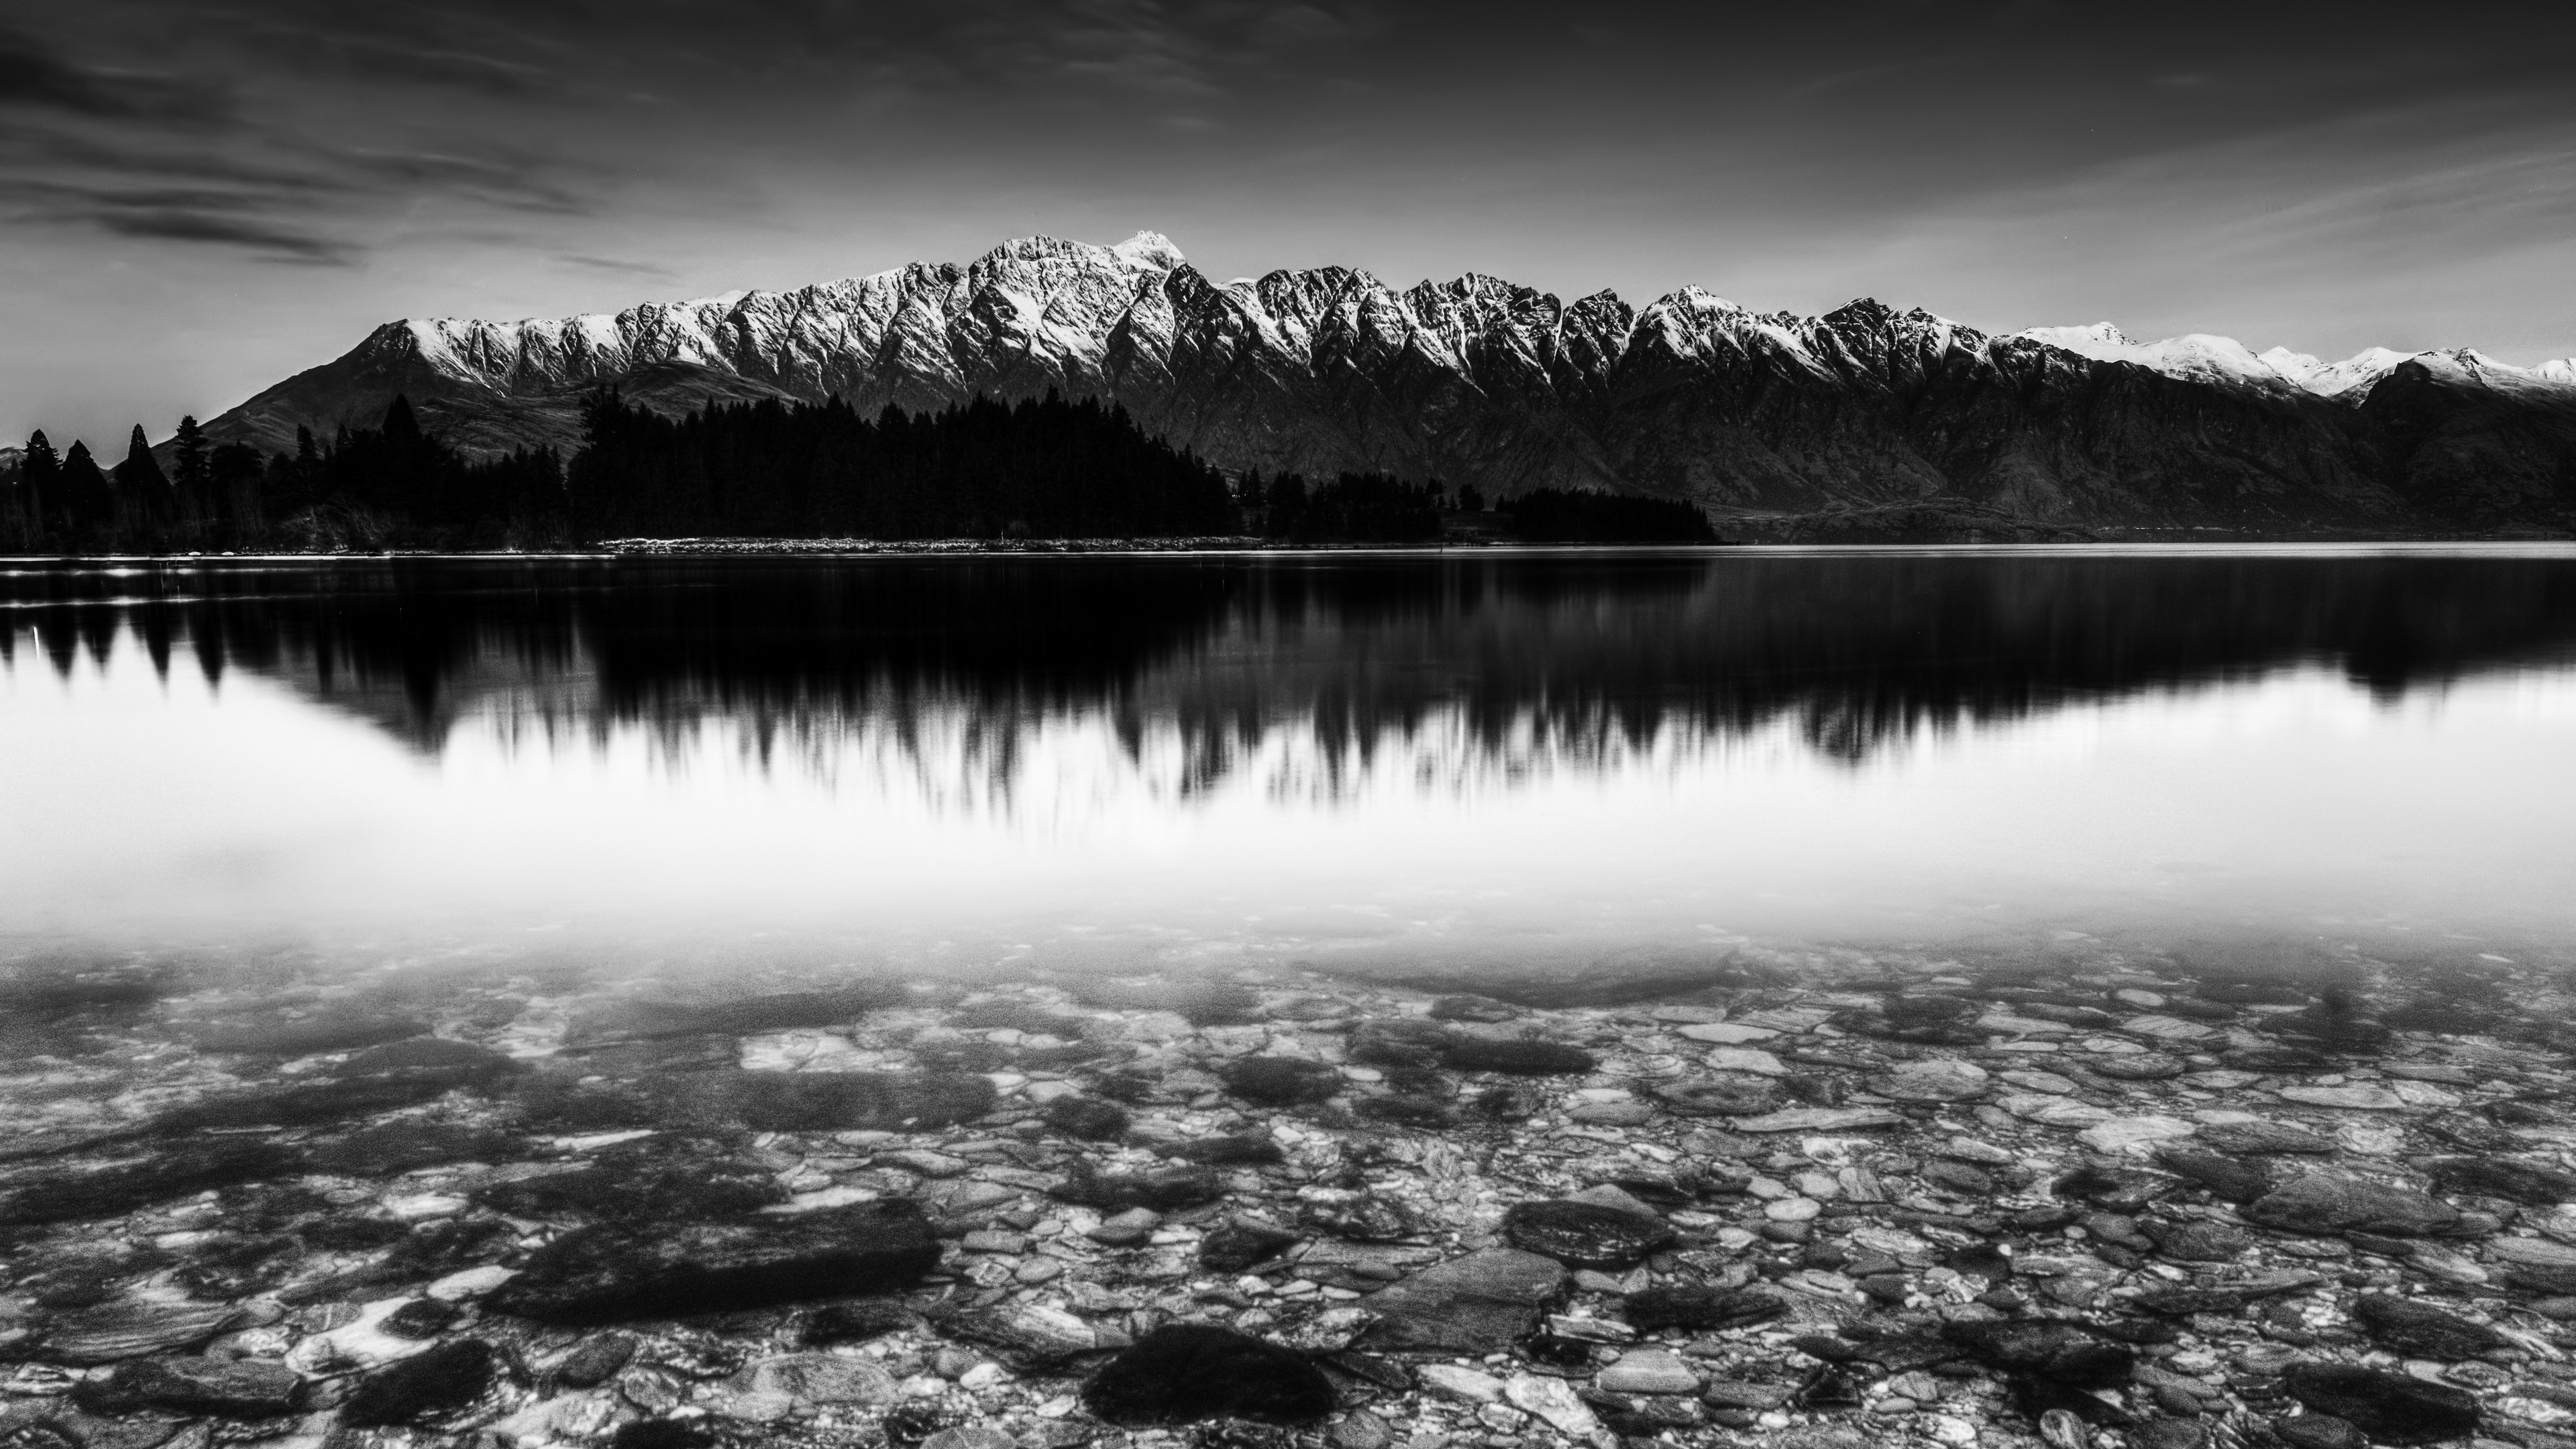 General 3840x2160 landscape 4K New Zealand water reflection nature mountains snow